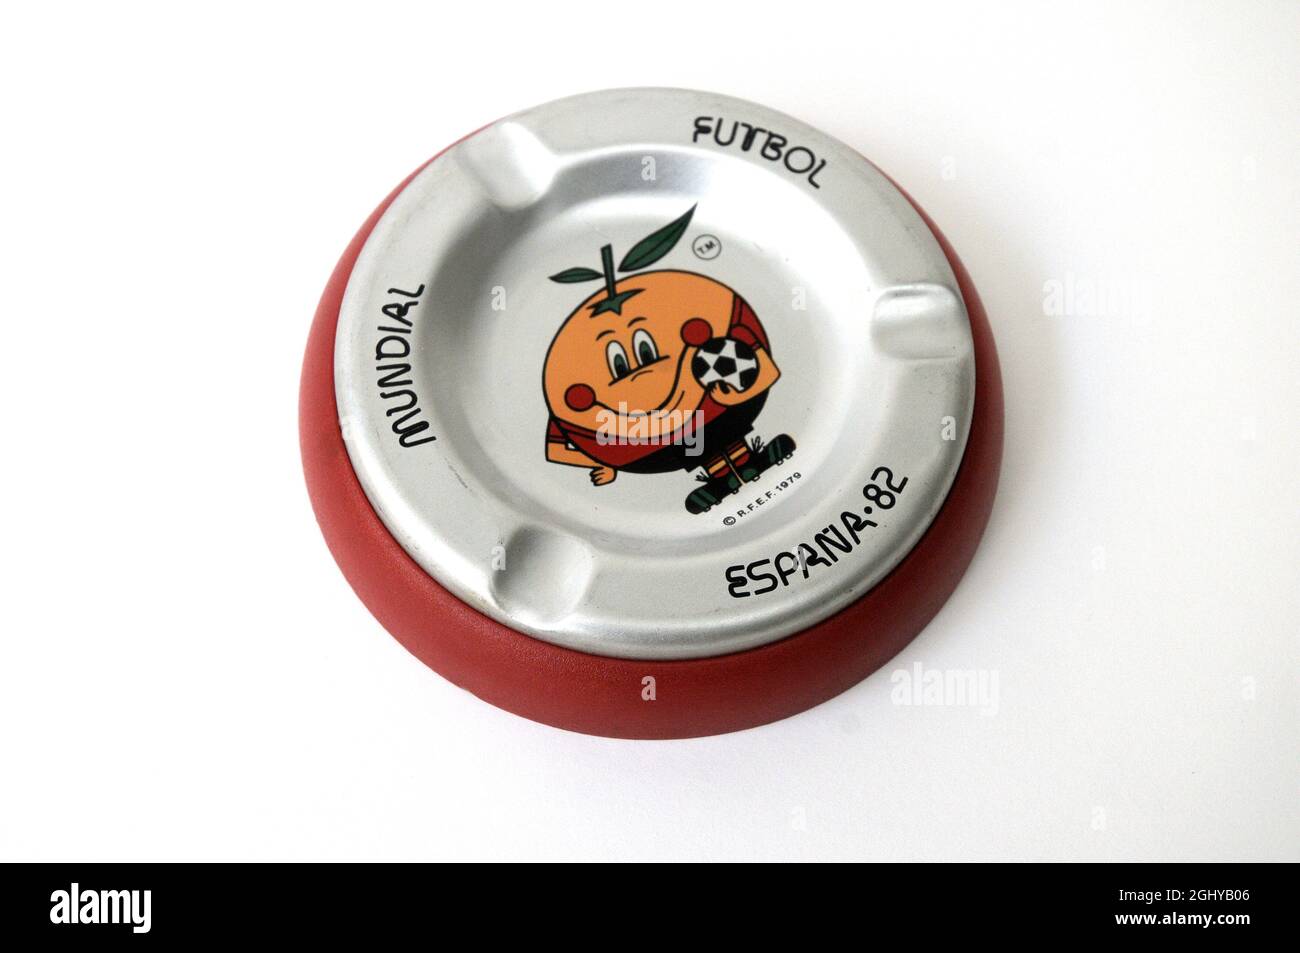 Ashtray, orange, football world cup, 1982, mascot, vintage ashtray, second hand, used, football, vintage object, collection, fans, footballers, Stock Photo